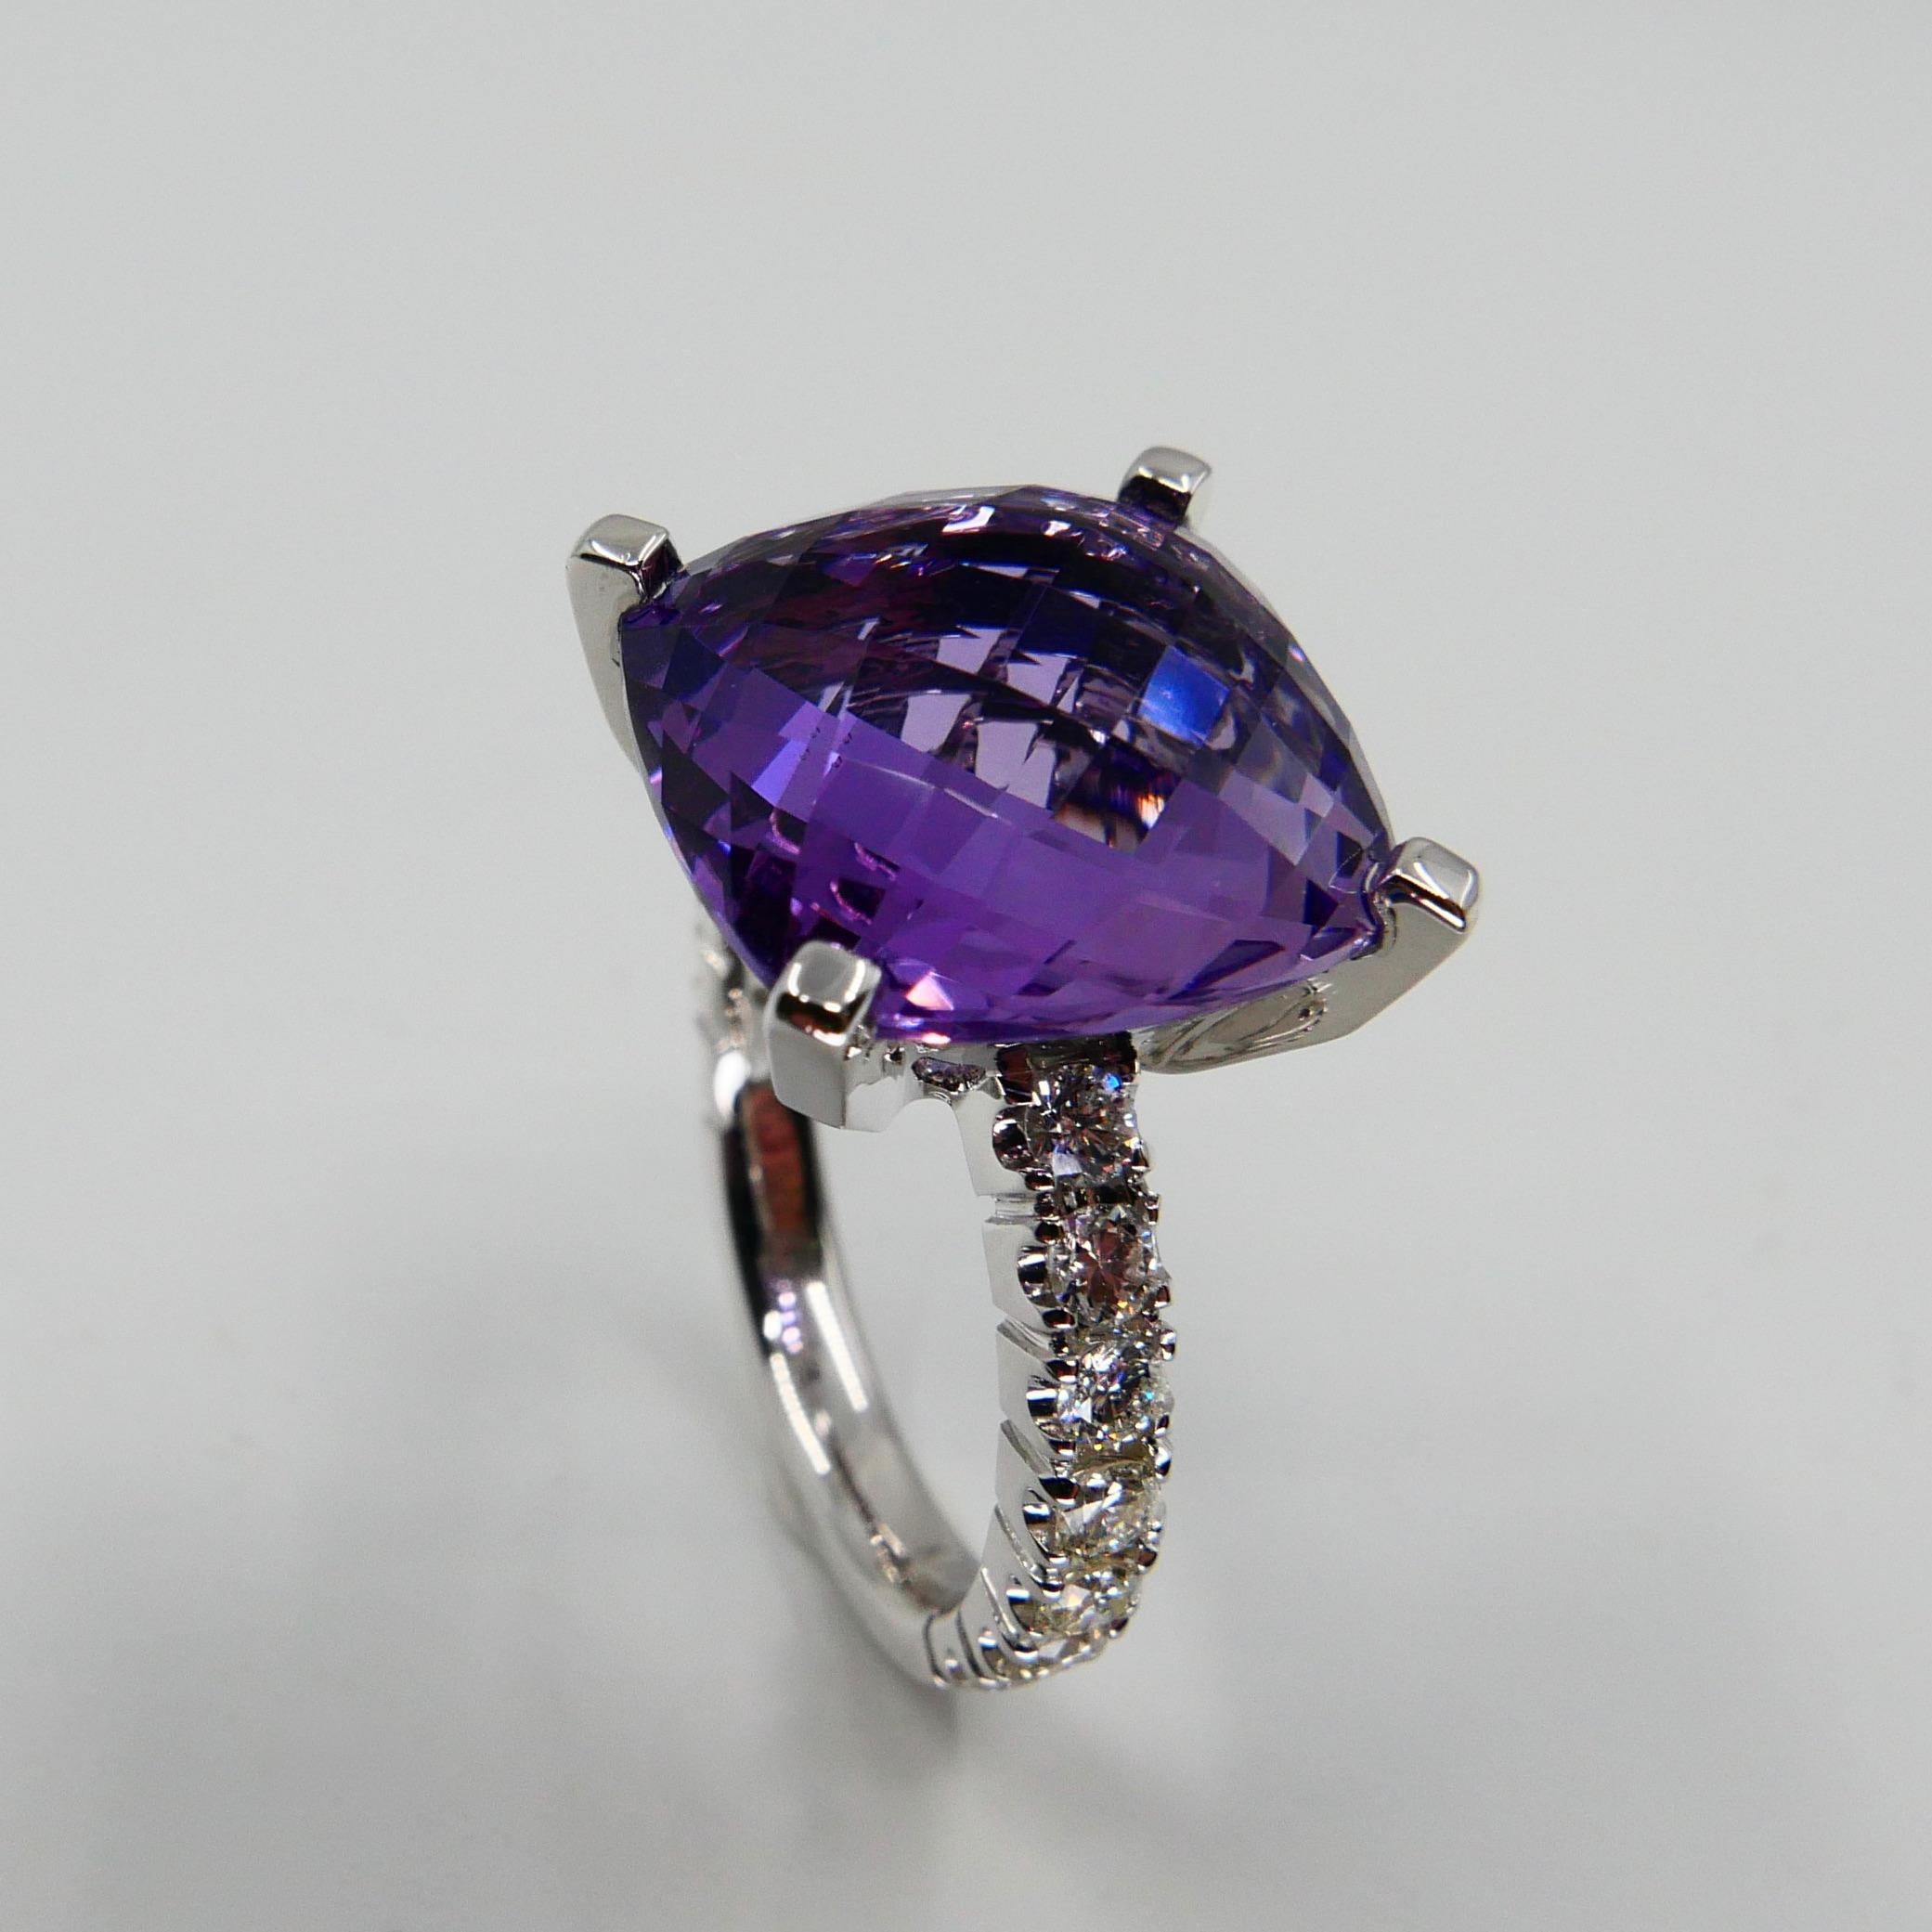 8.67 Carat Faceted Amethyst and Diamond Cocktail Ring, 18 Karat White Gold For Sale 6